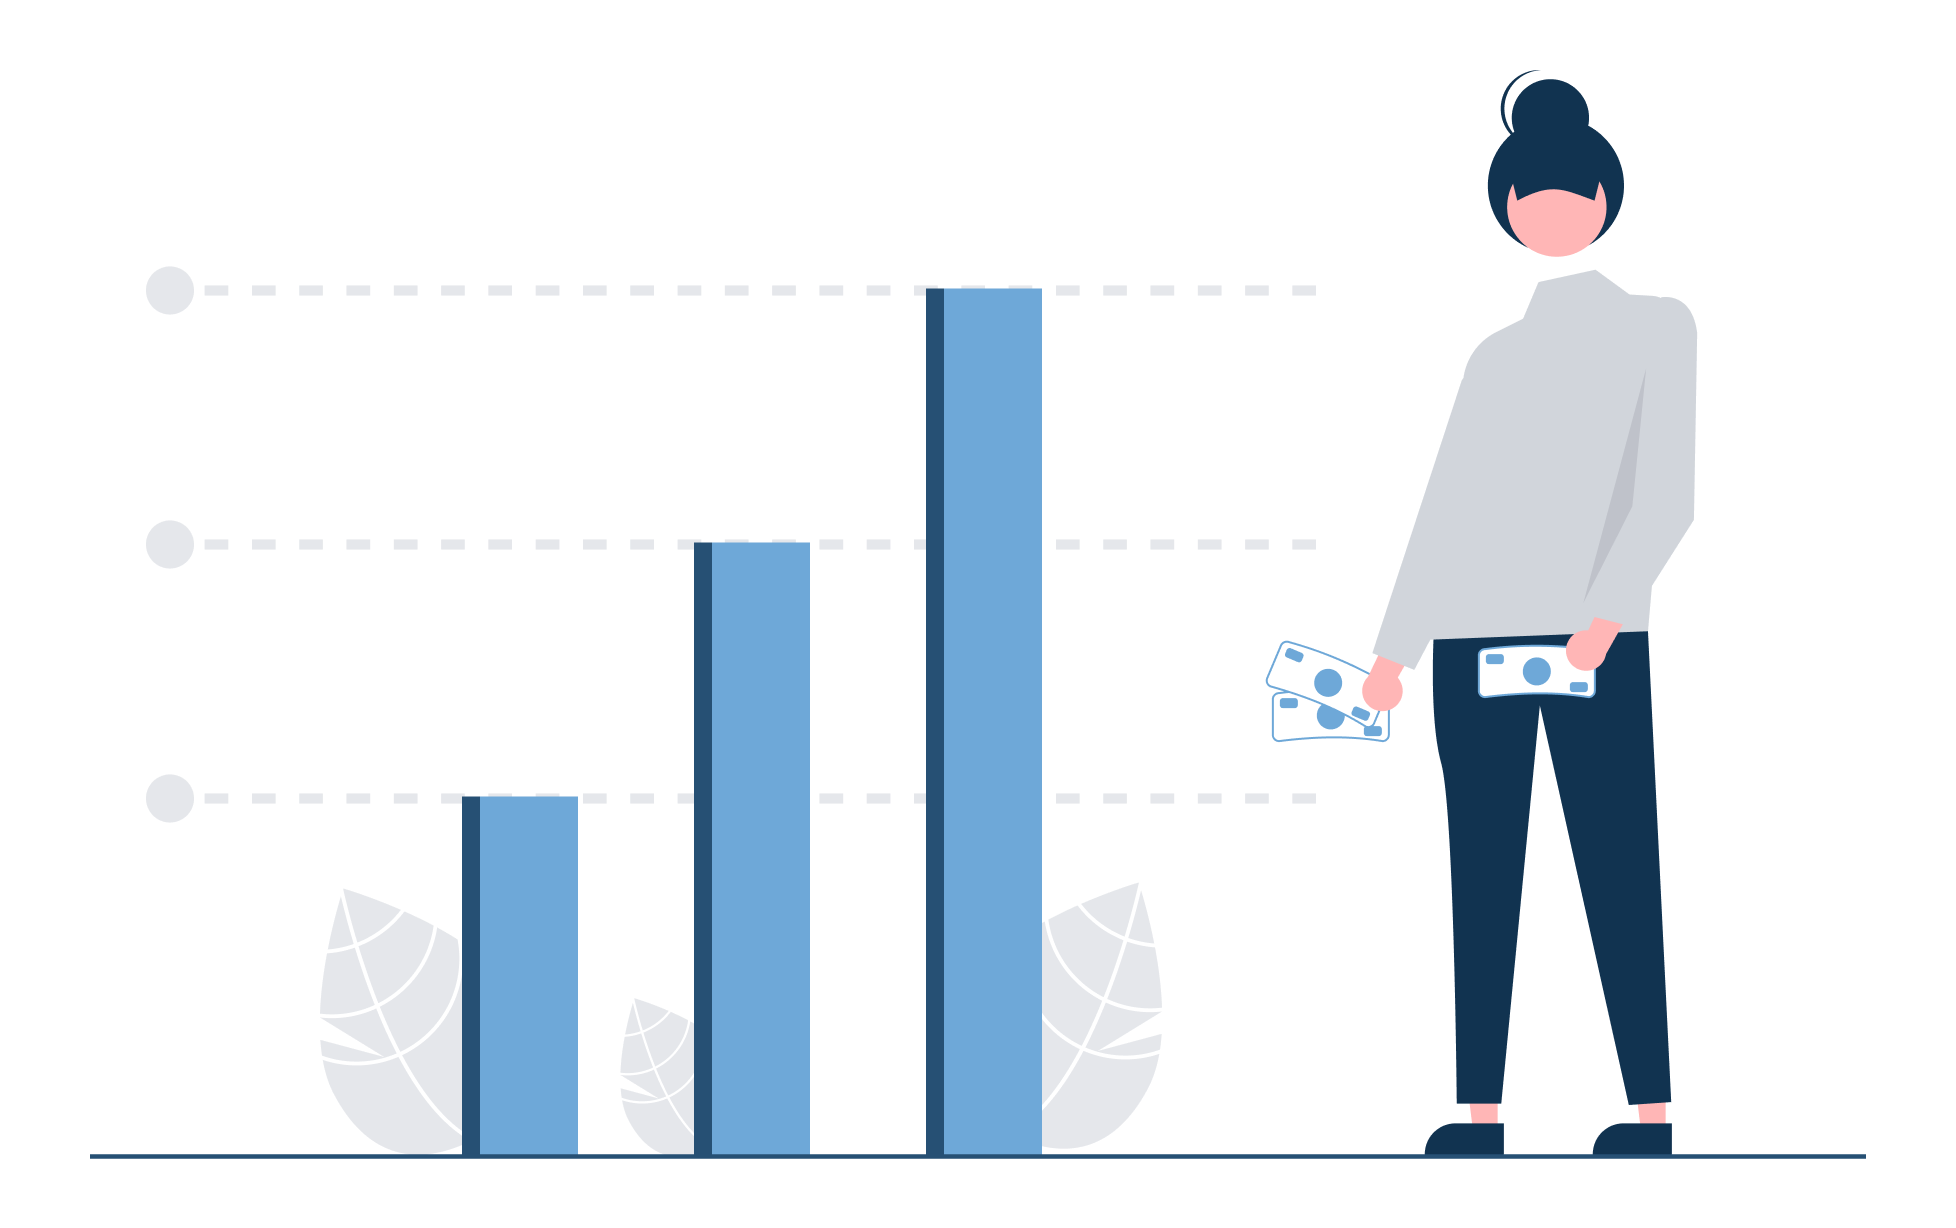 Illustration of a figure holding money standing next to a chart with three increasingly tall bars